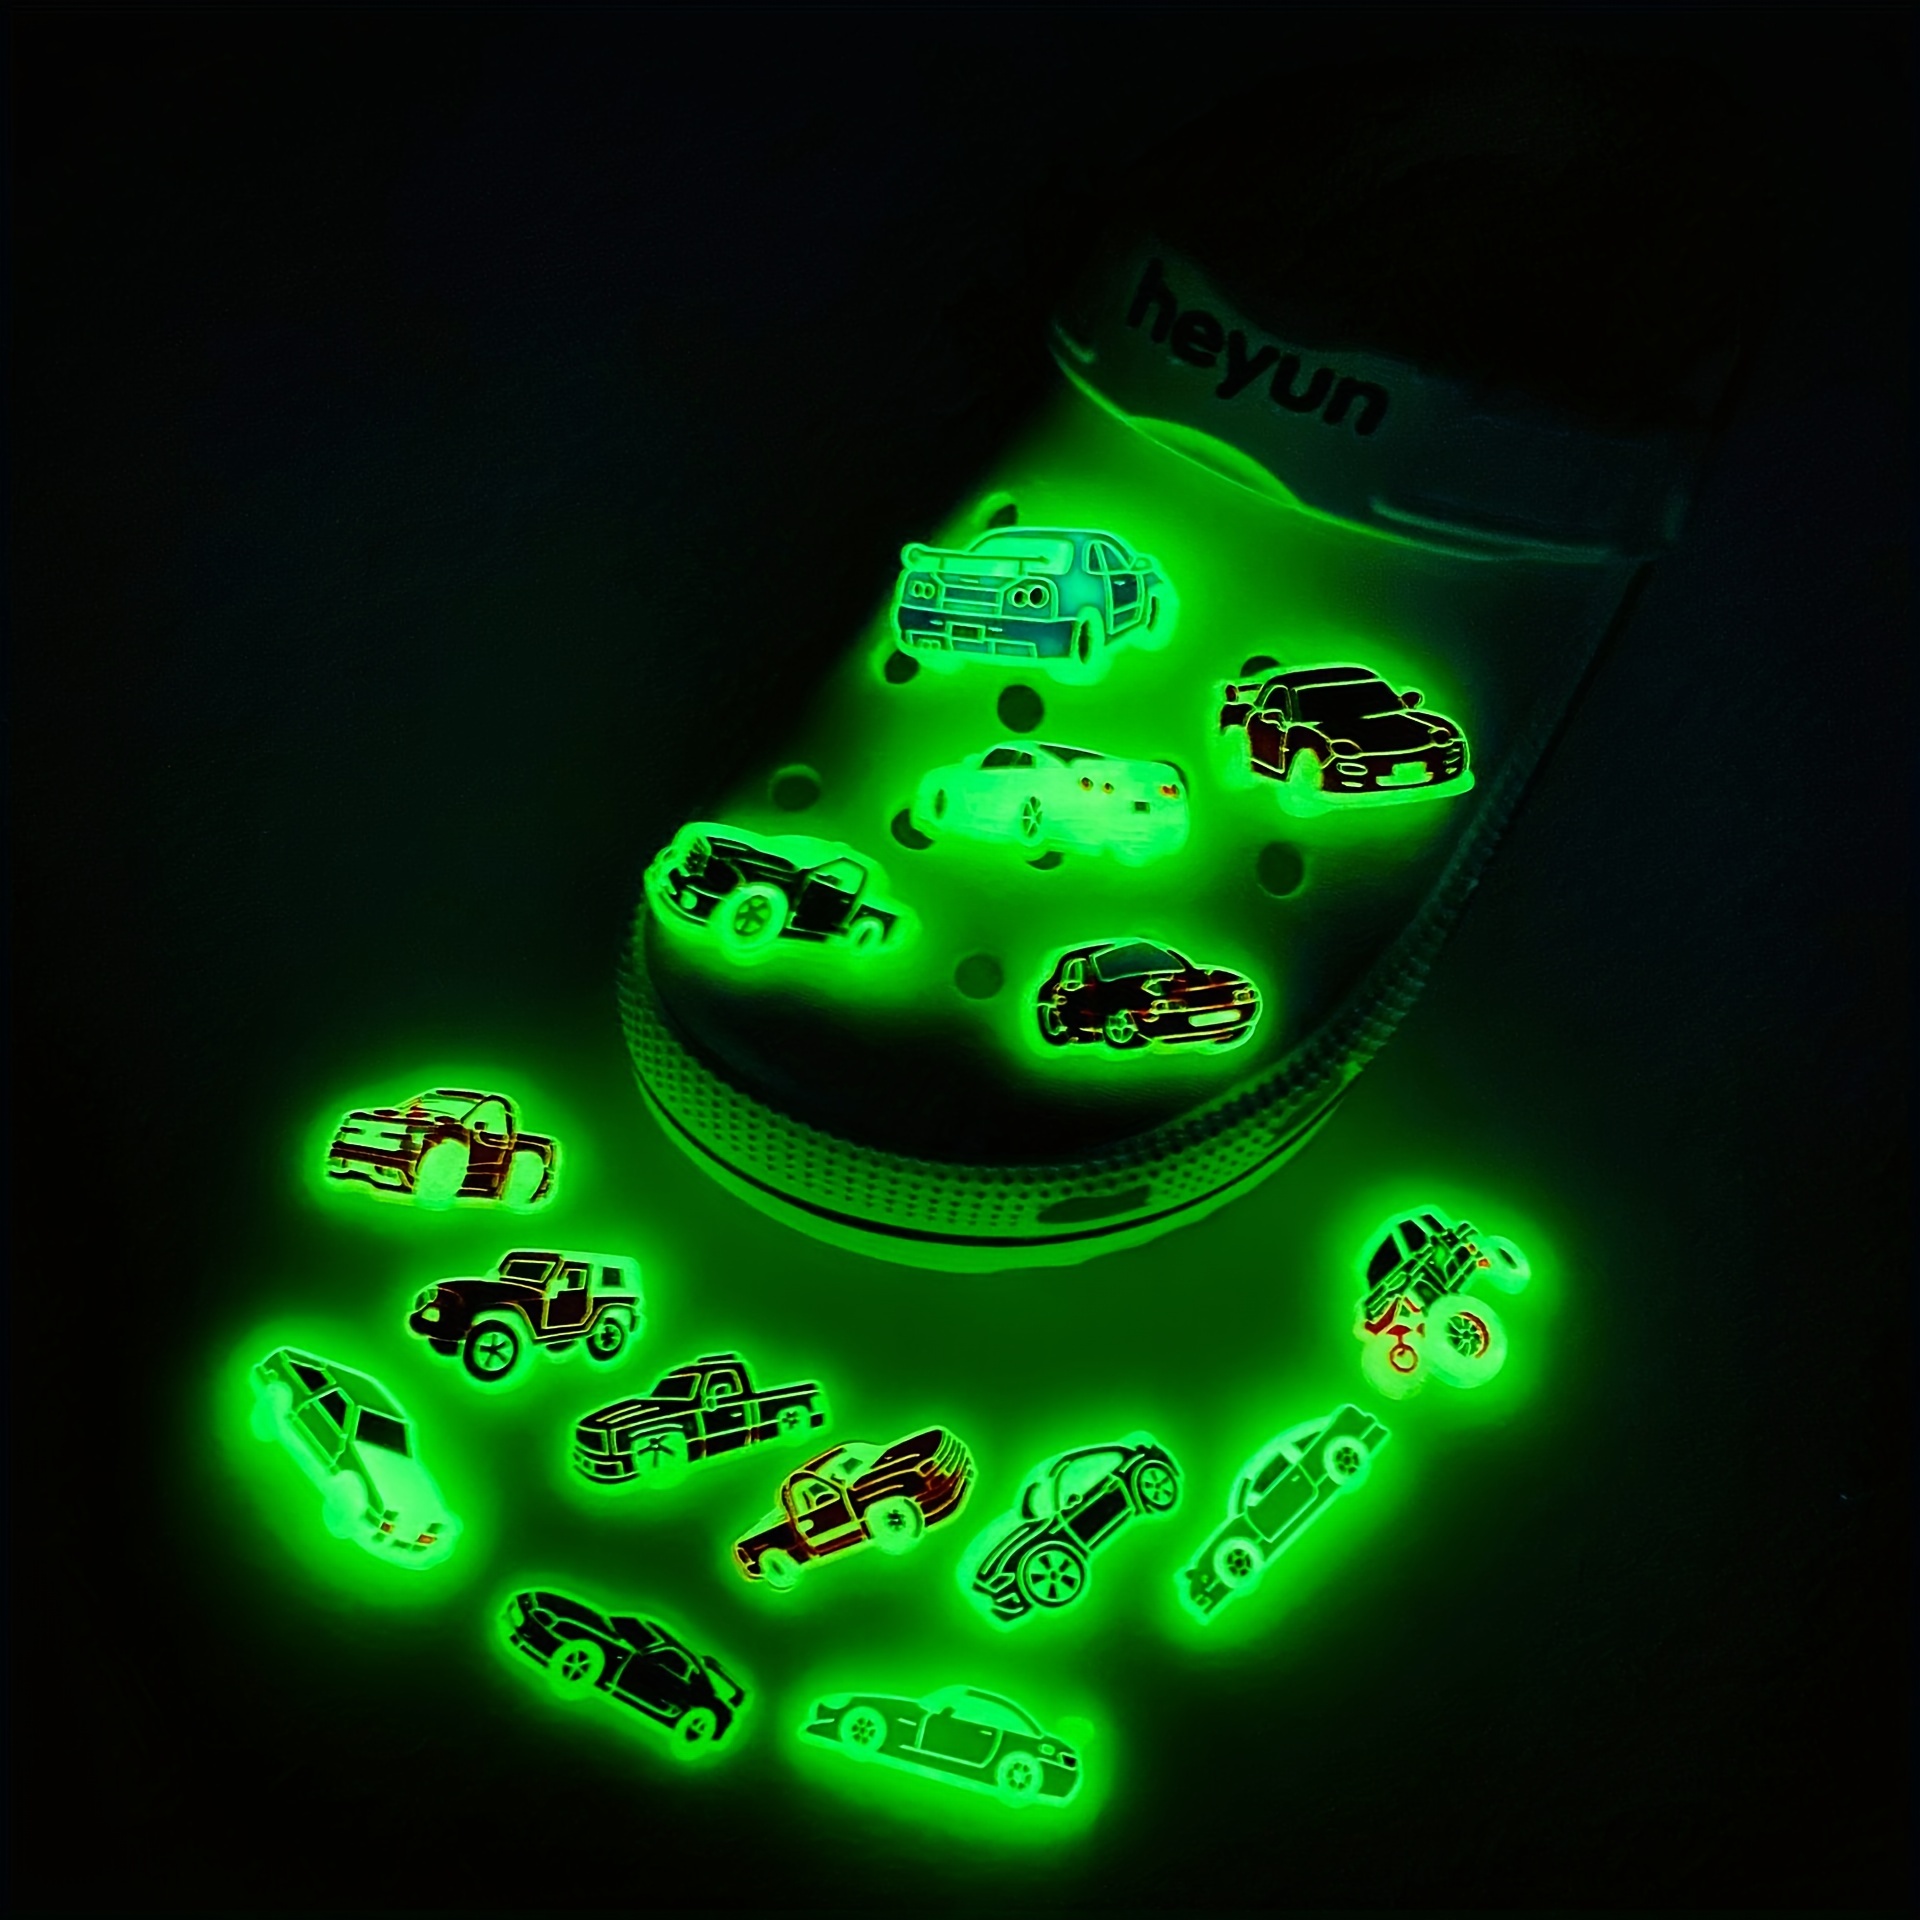 Glow in the Dark Letter Croc Charms